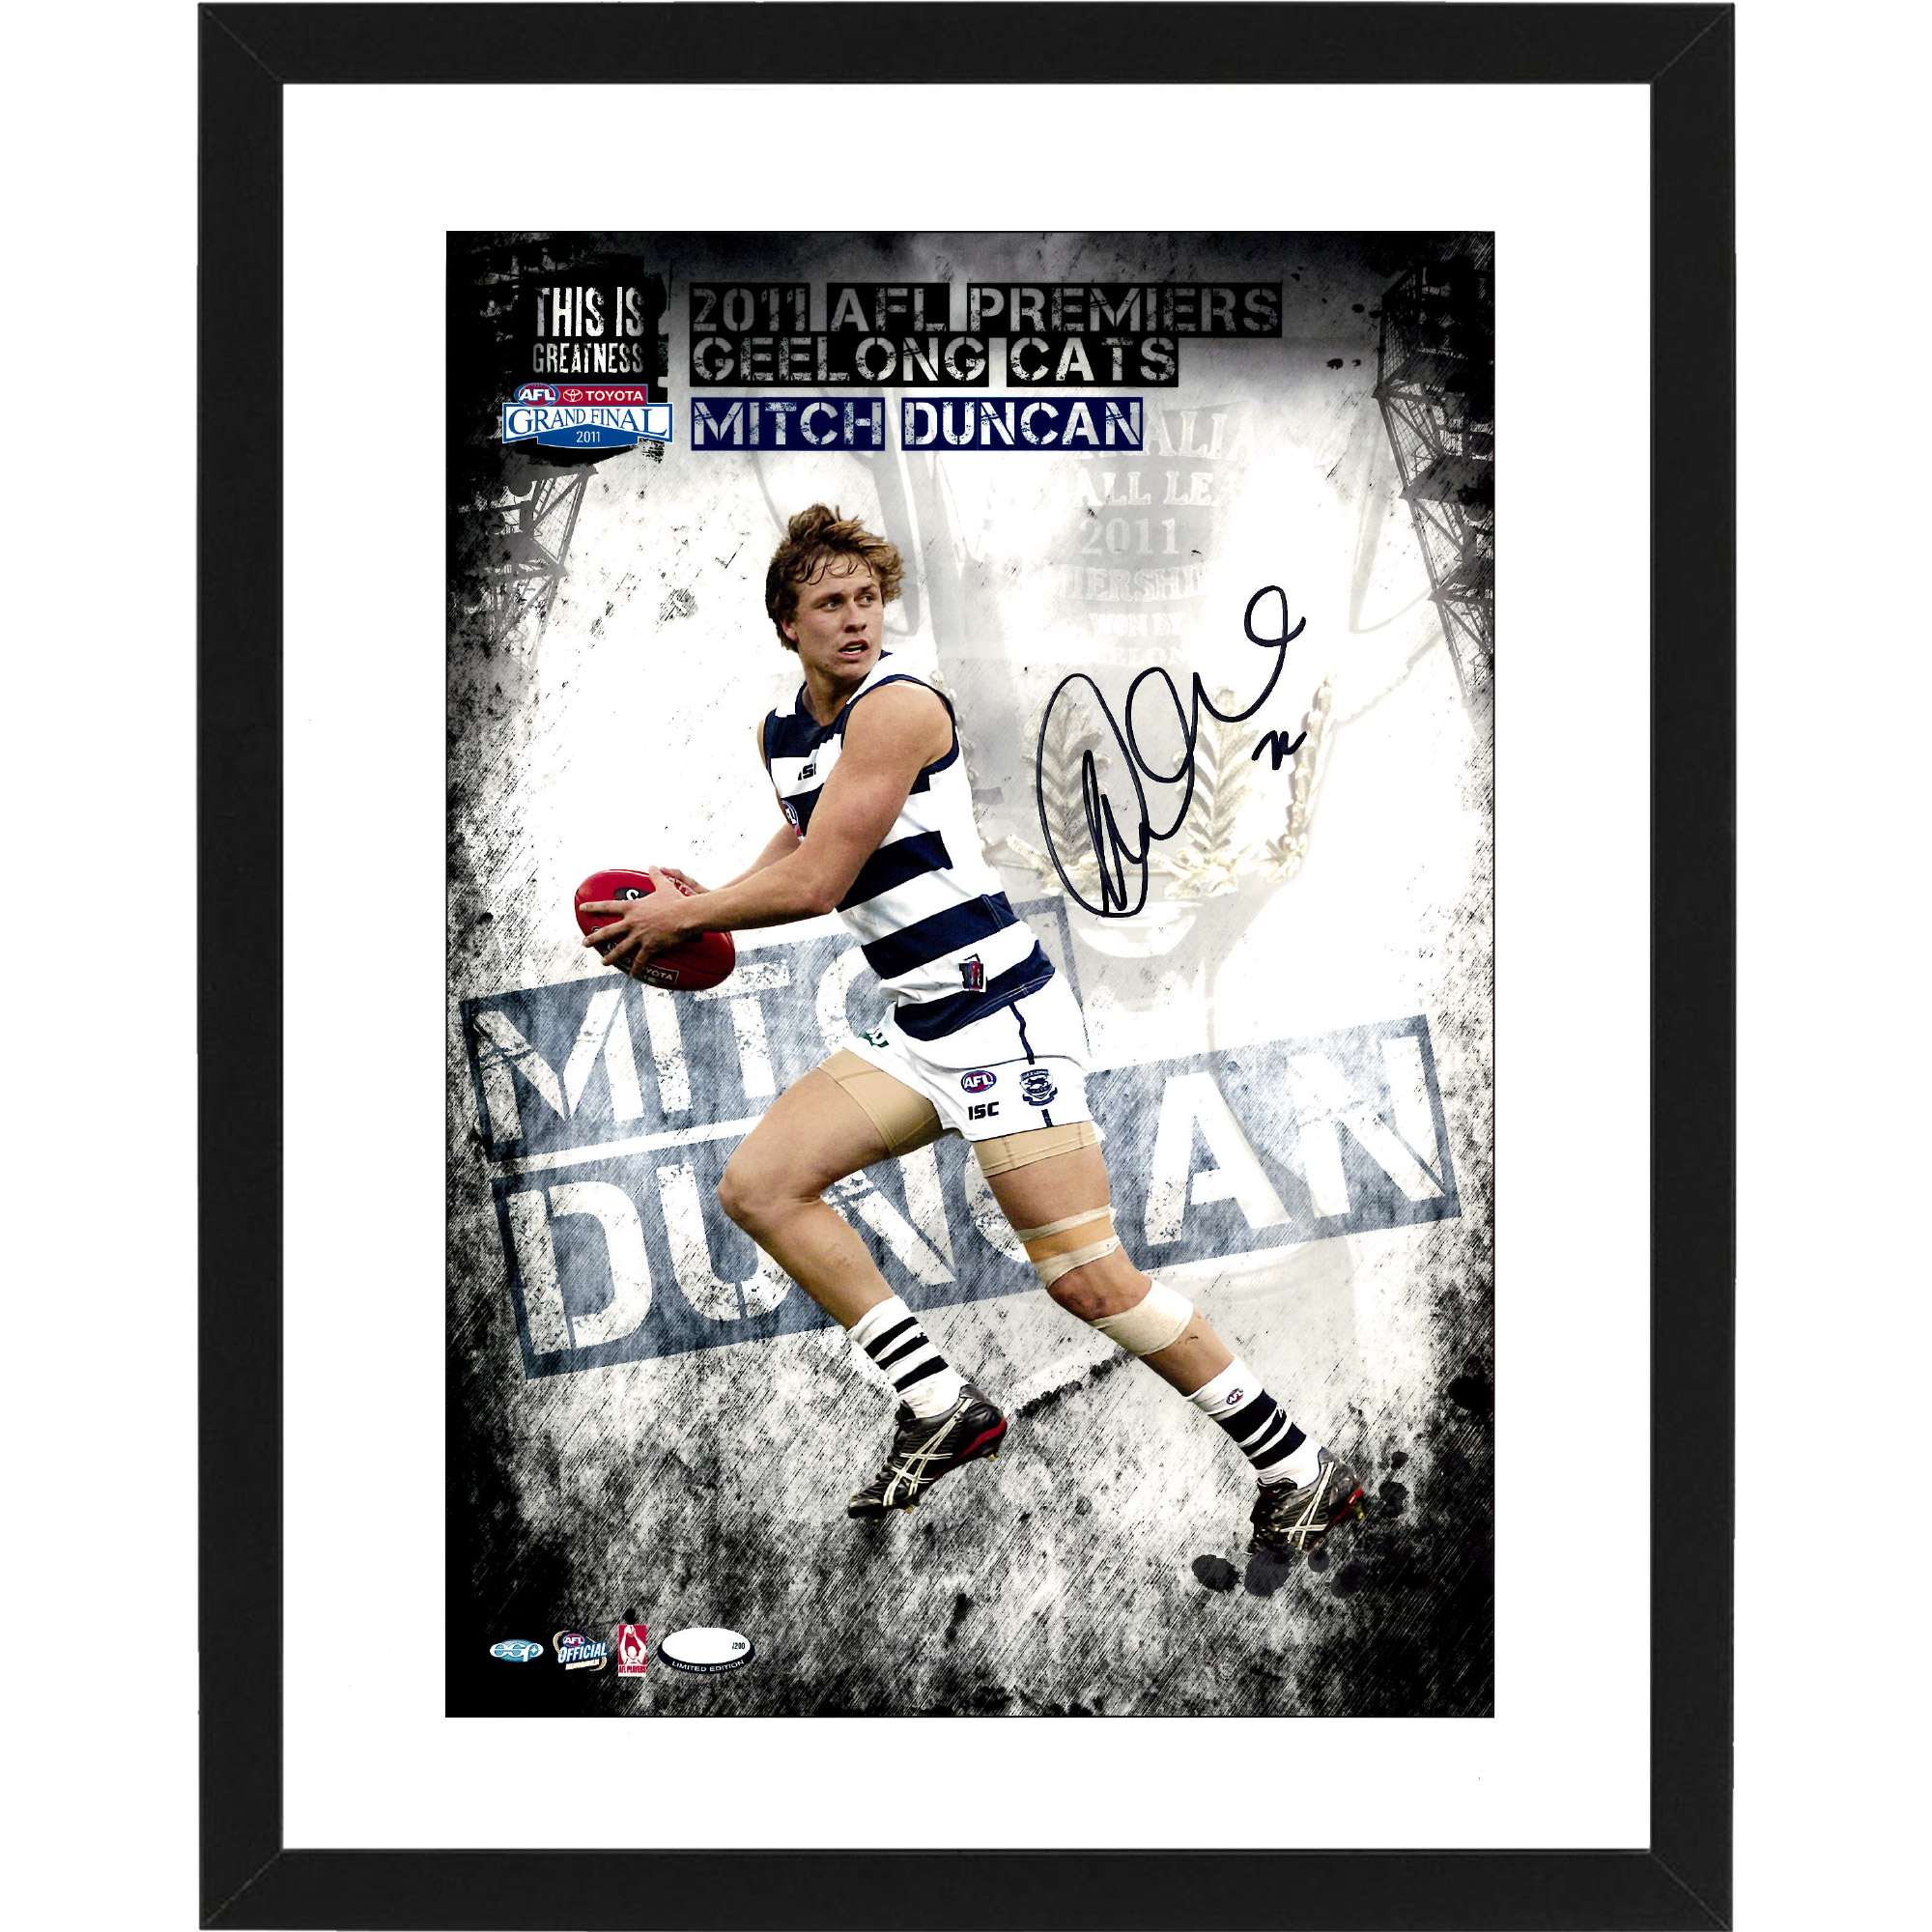 Geelong Cats - MITCH DUNCAN Signed & Framed 2011 Premiers Hero Shot ...